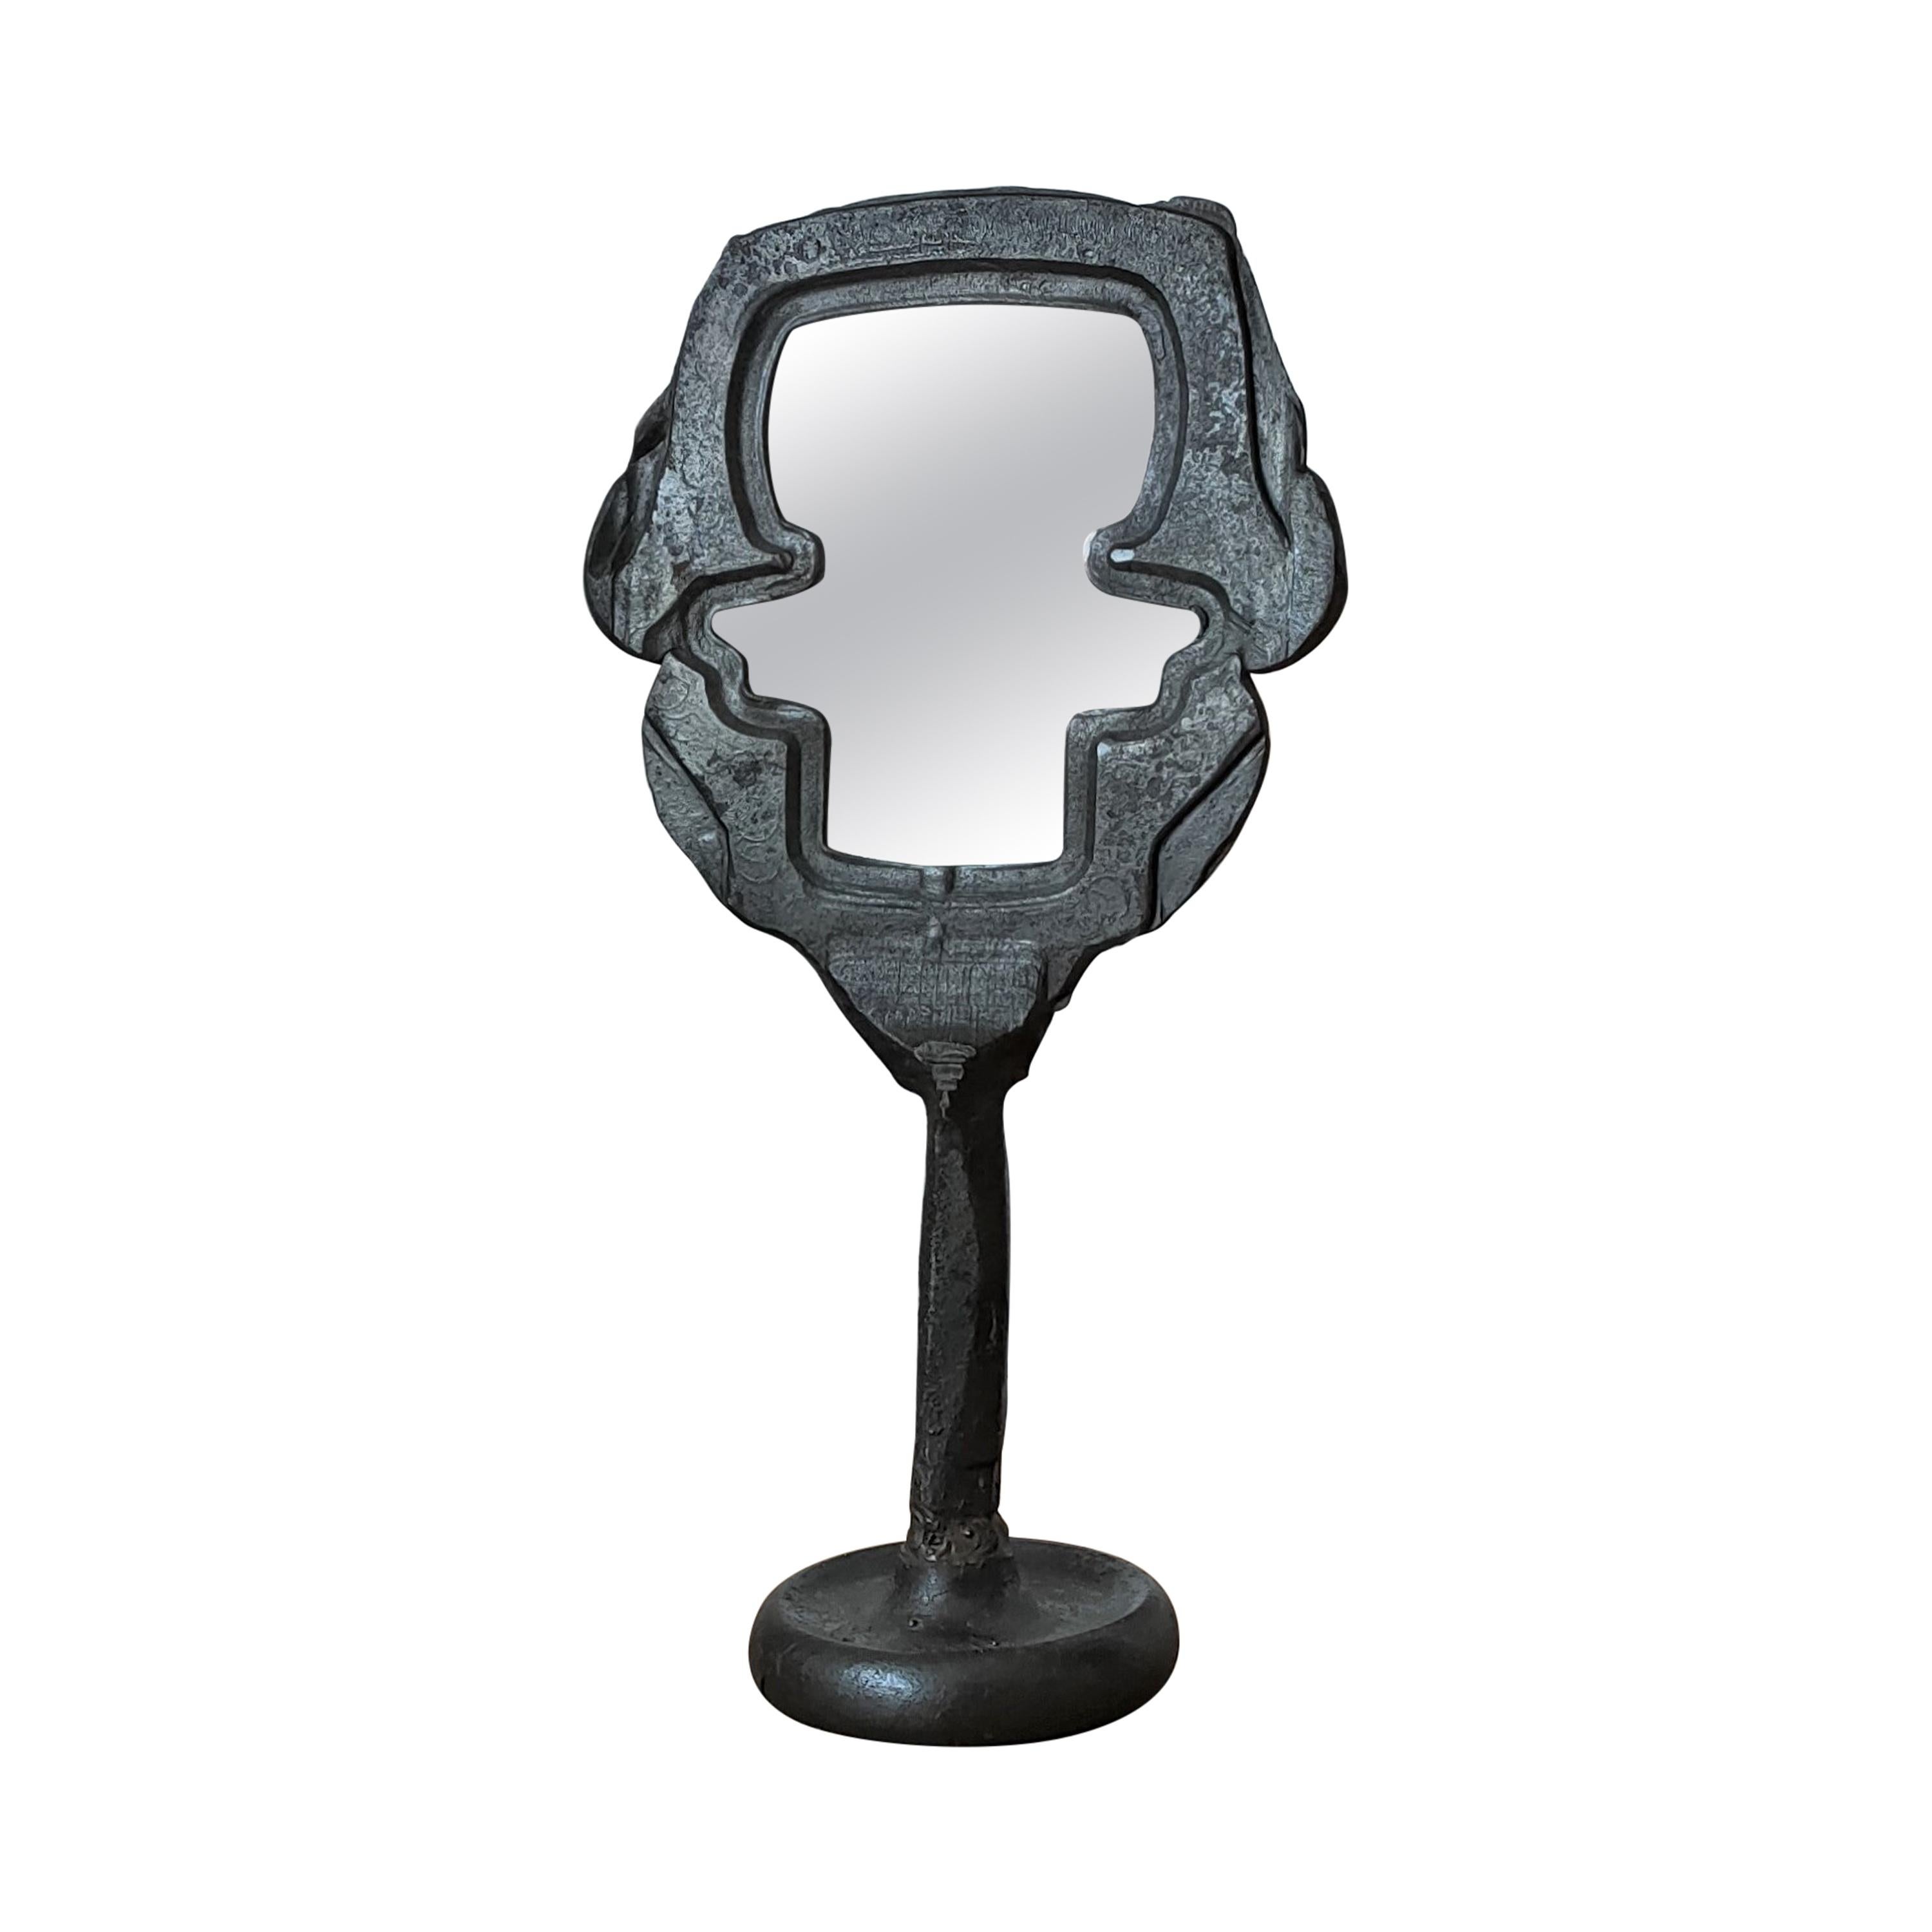 One of a Kind Cast Iron Brutalist Psyché Table Mirror, France, 1970's For Sale